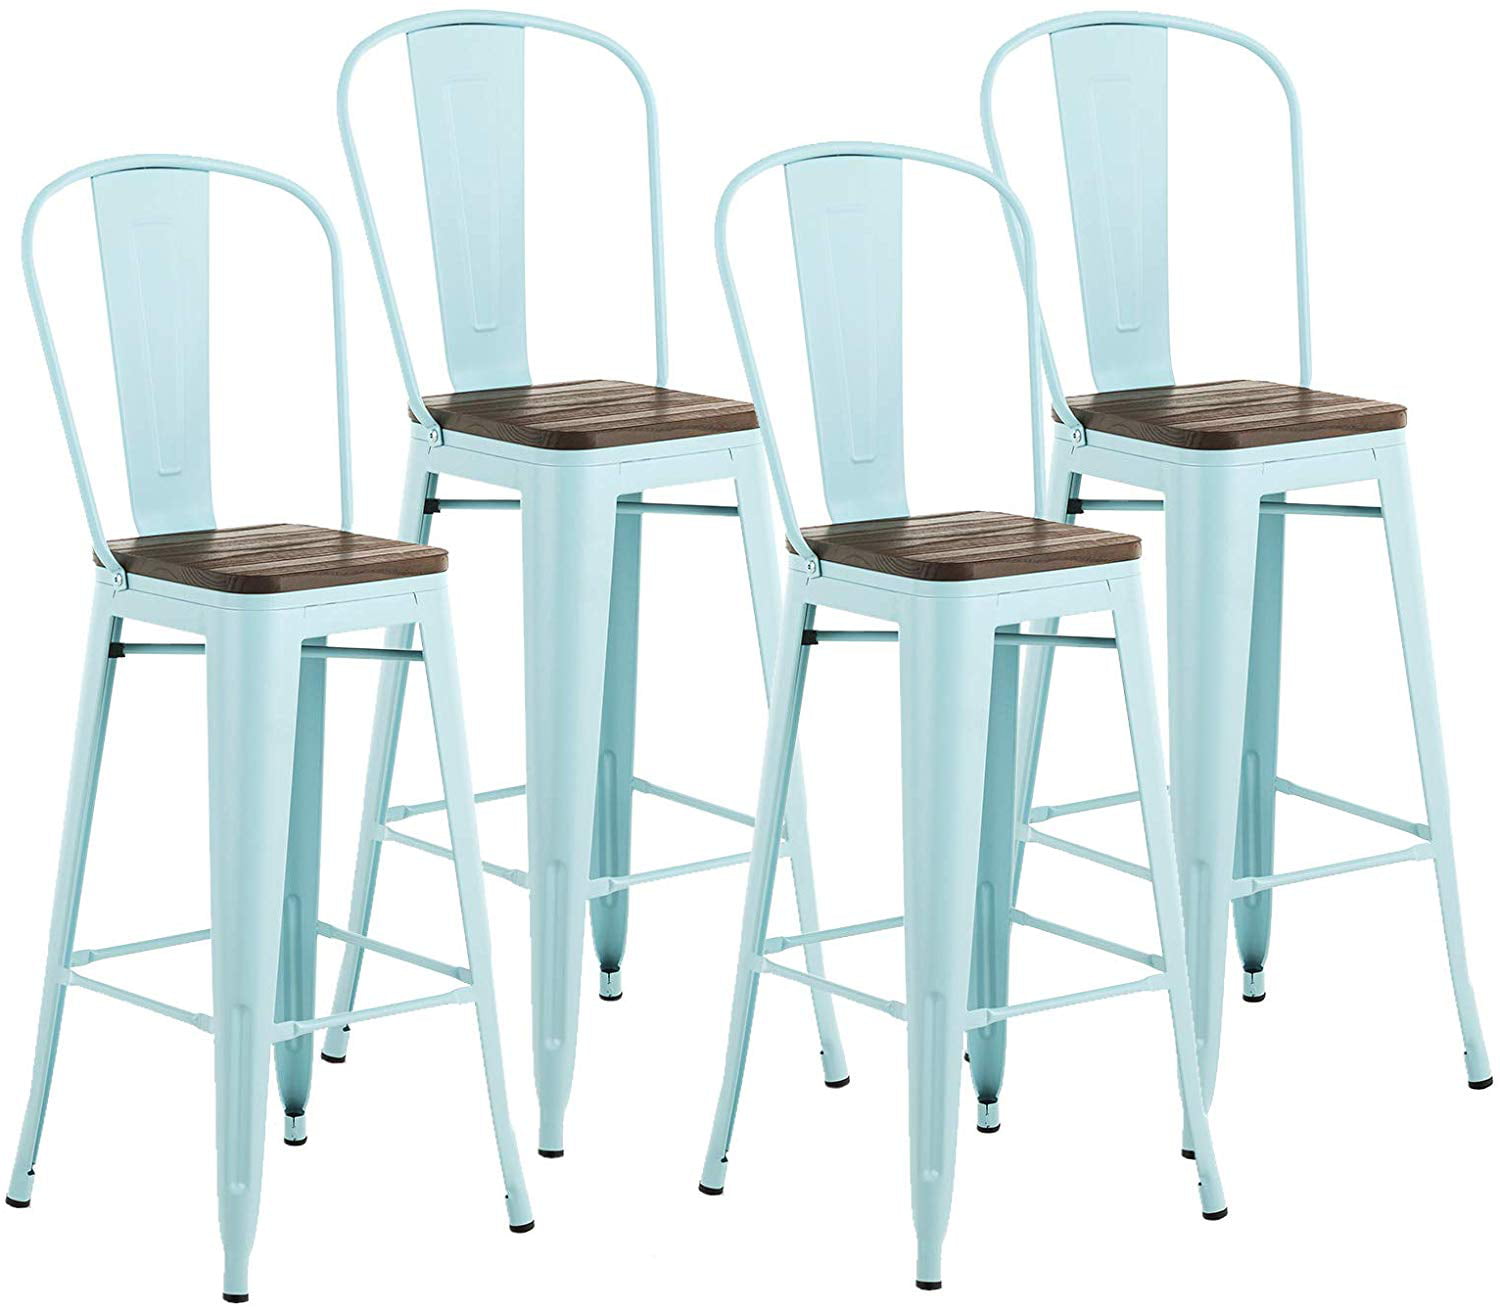 mecor metal bar stools set of 4 wremovable backrest 30'' dining bar  height chairs with wood seat light blue  walmart